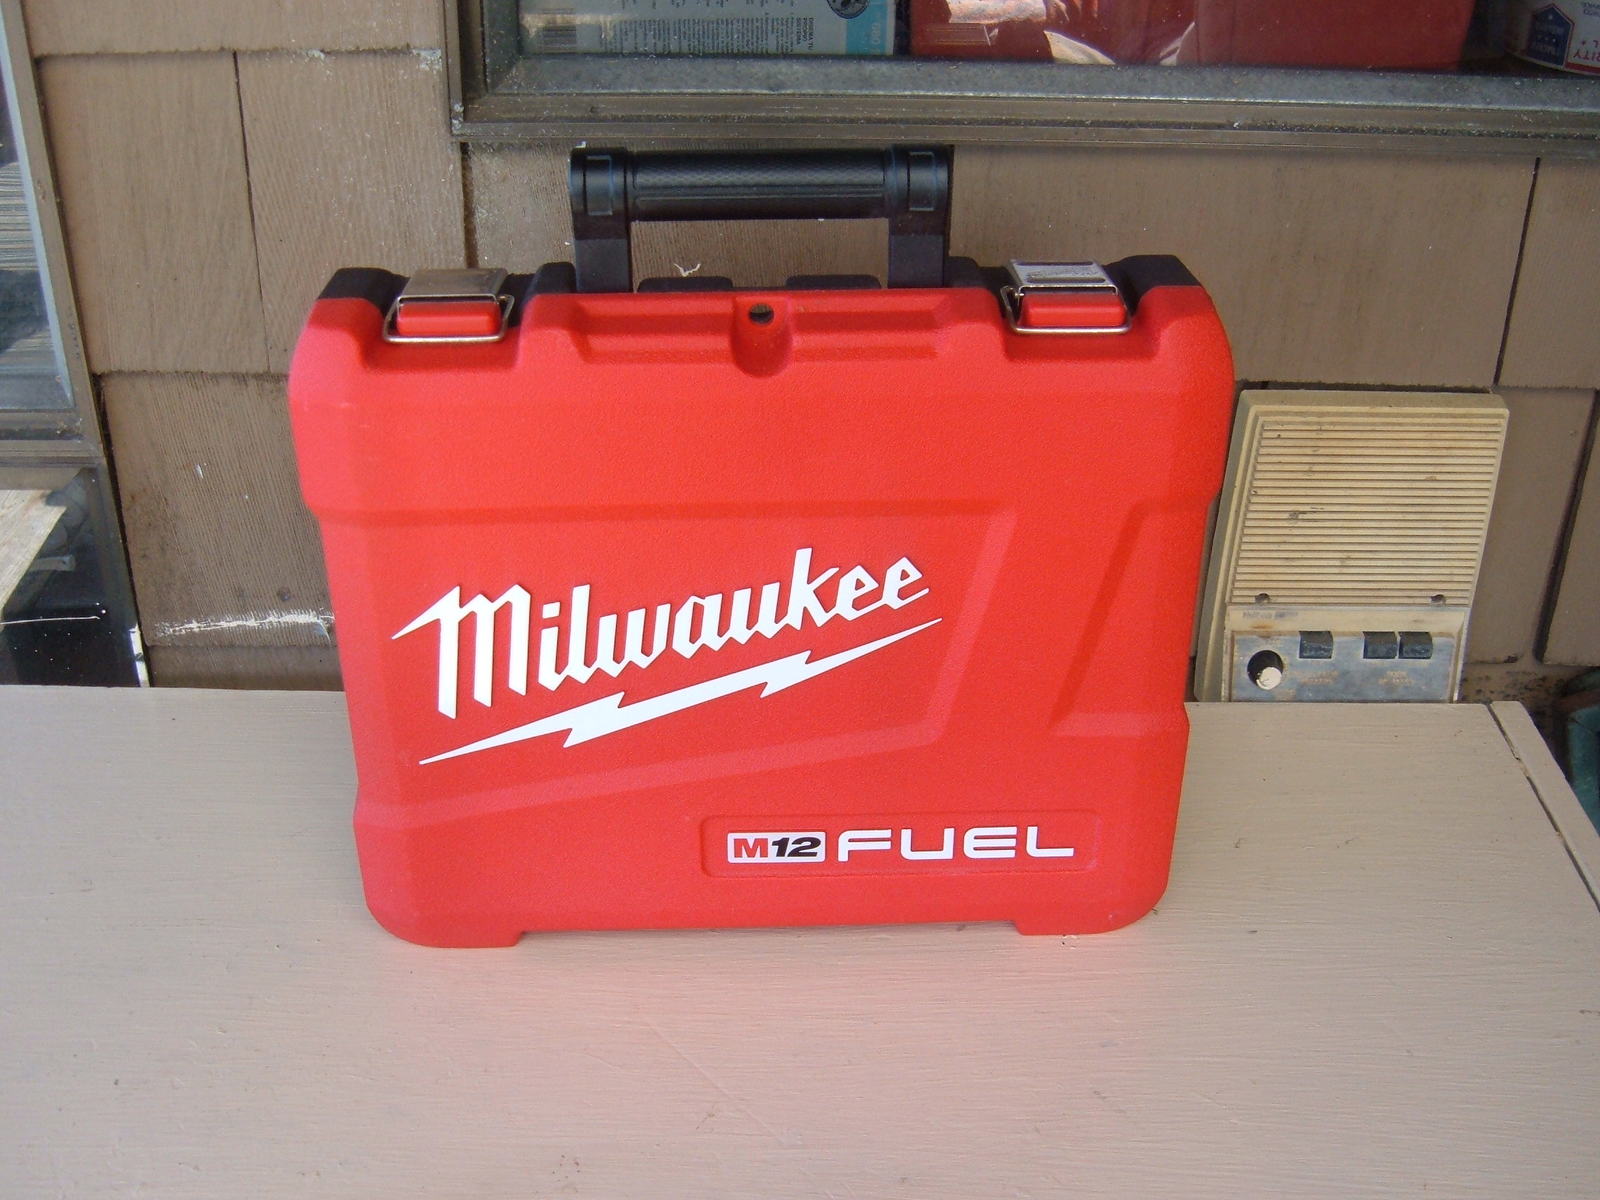 Milwaukee M12 Fuel 2403-22 1/2" Drill-driver Empty Case only. New. - $20.00